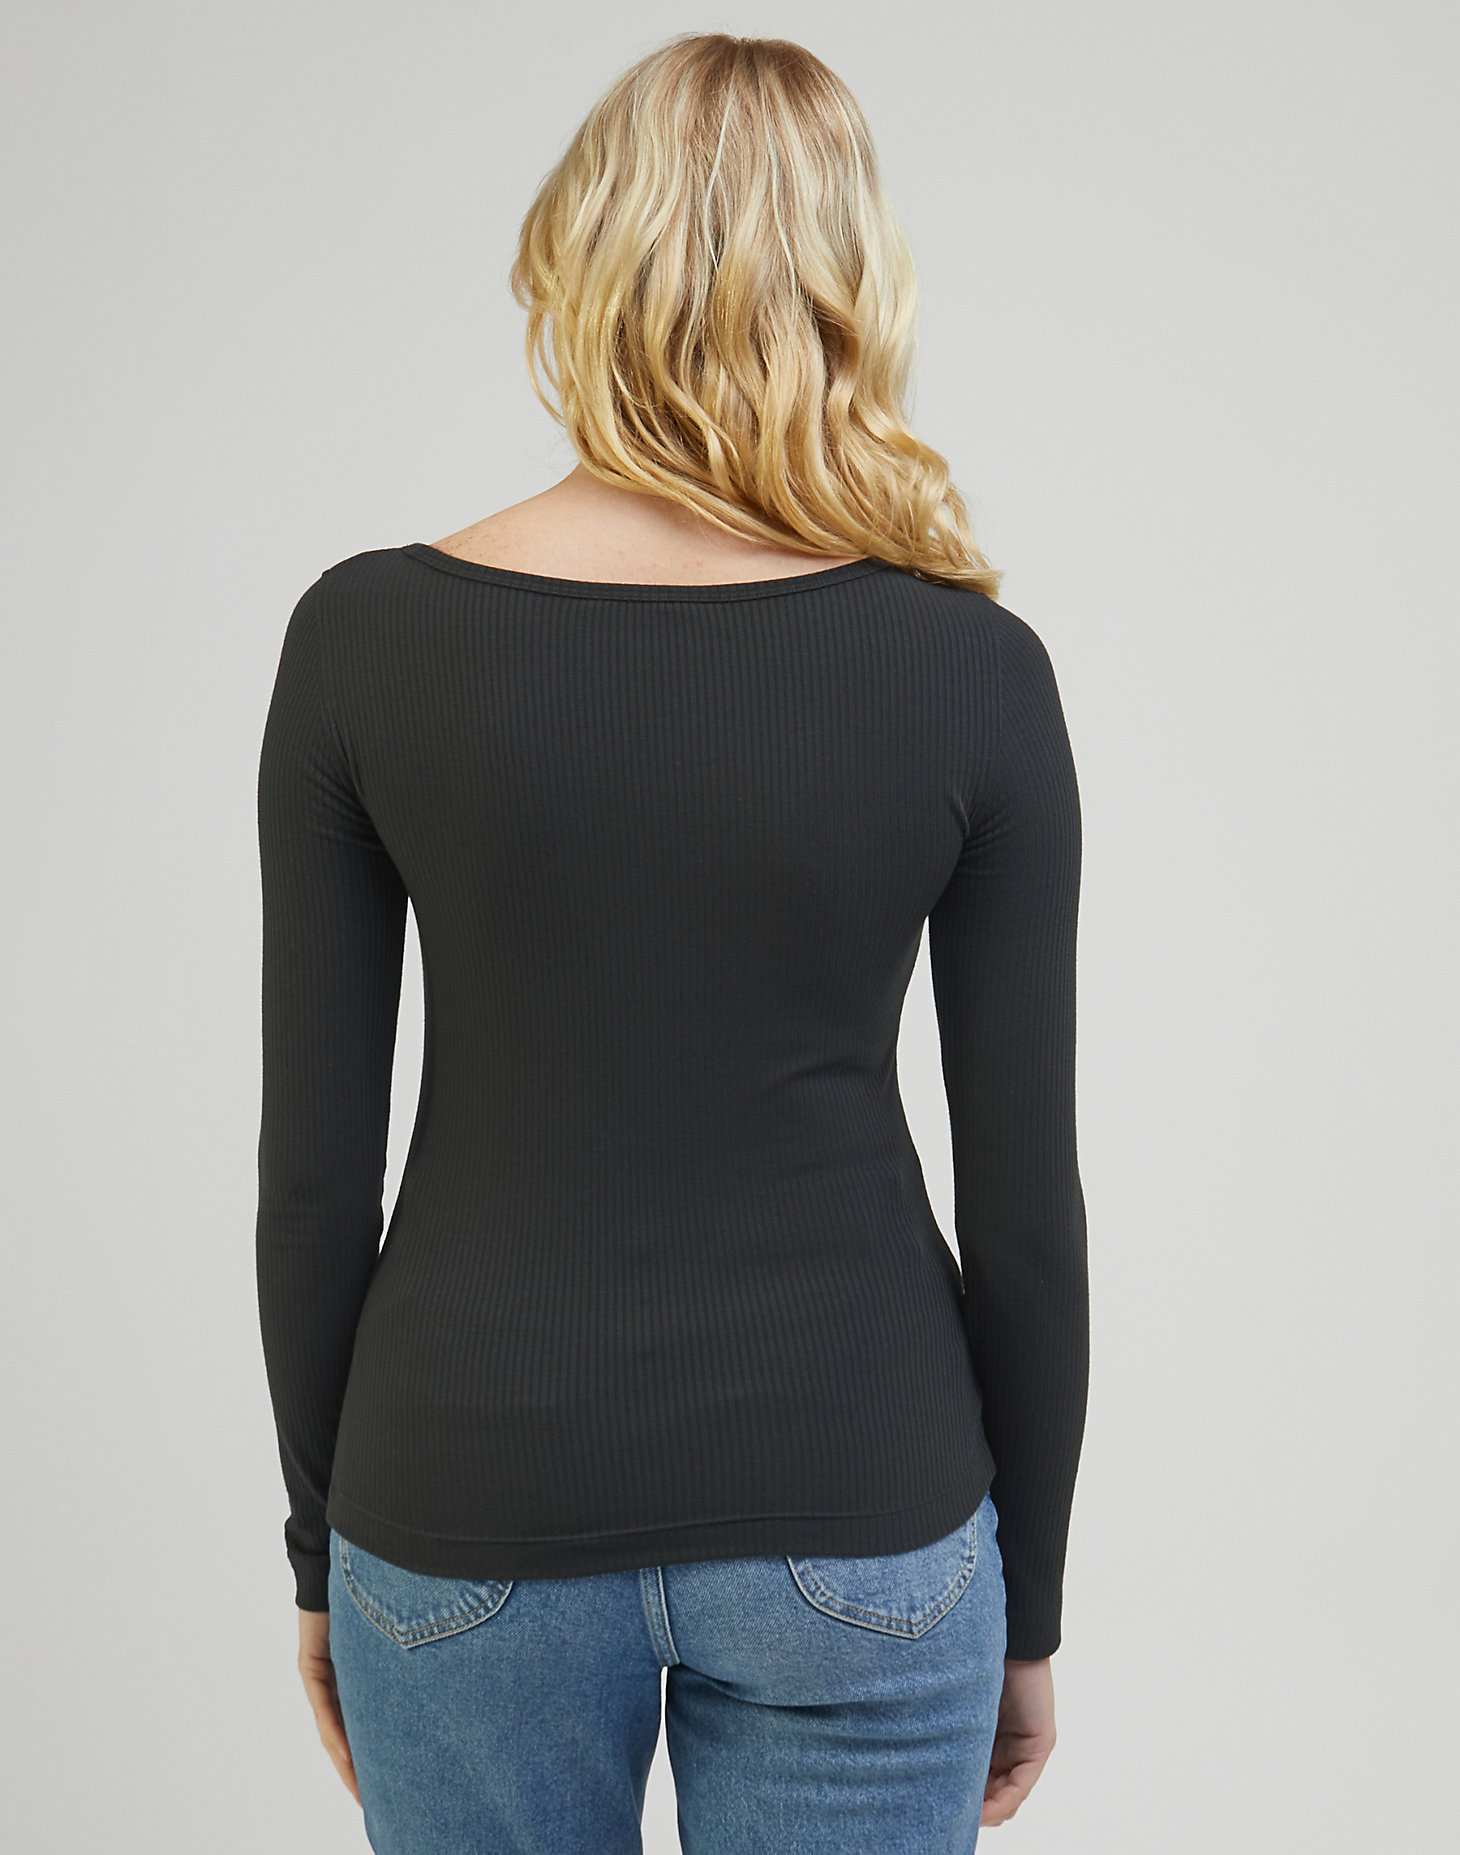 Long Sleeve Boat Neck Tee in Charcoal alternative view 1